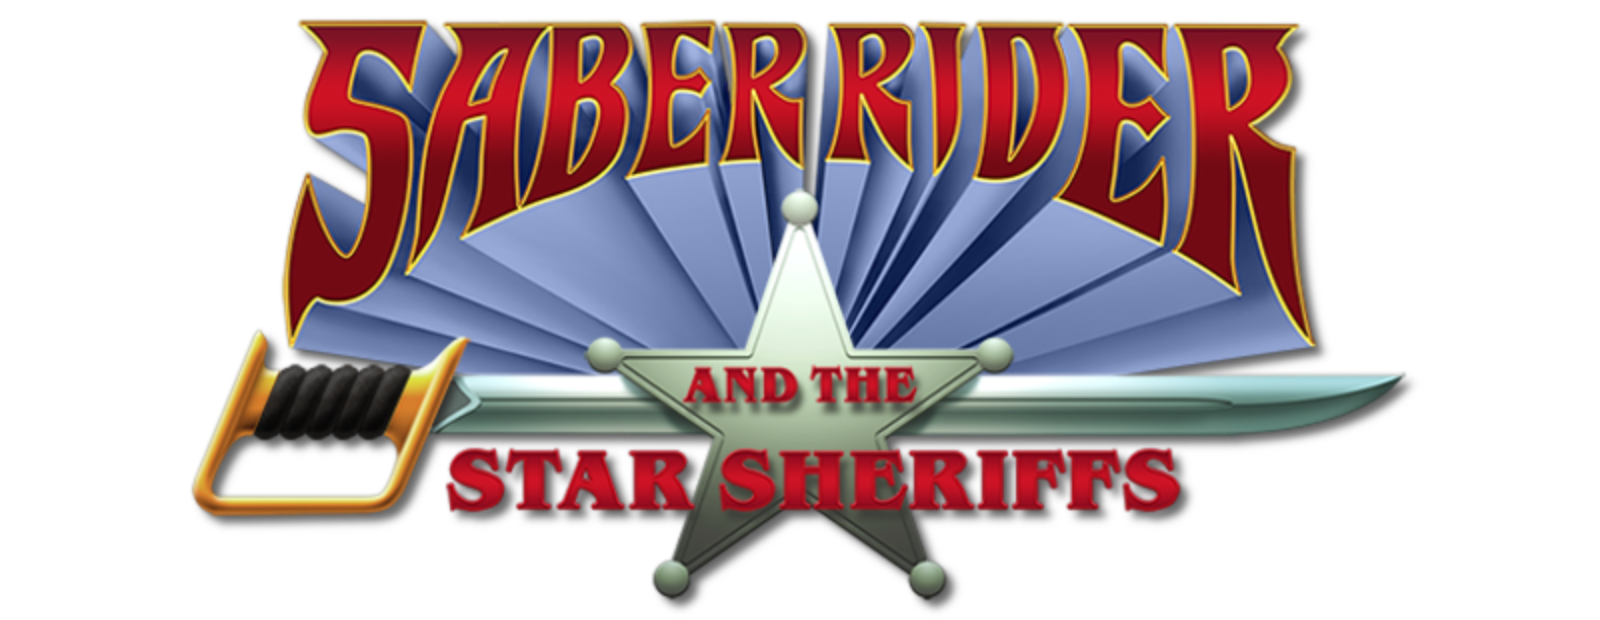 Saber Rider and the Star Sheriffs (6 DVDs Box Set)